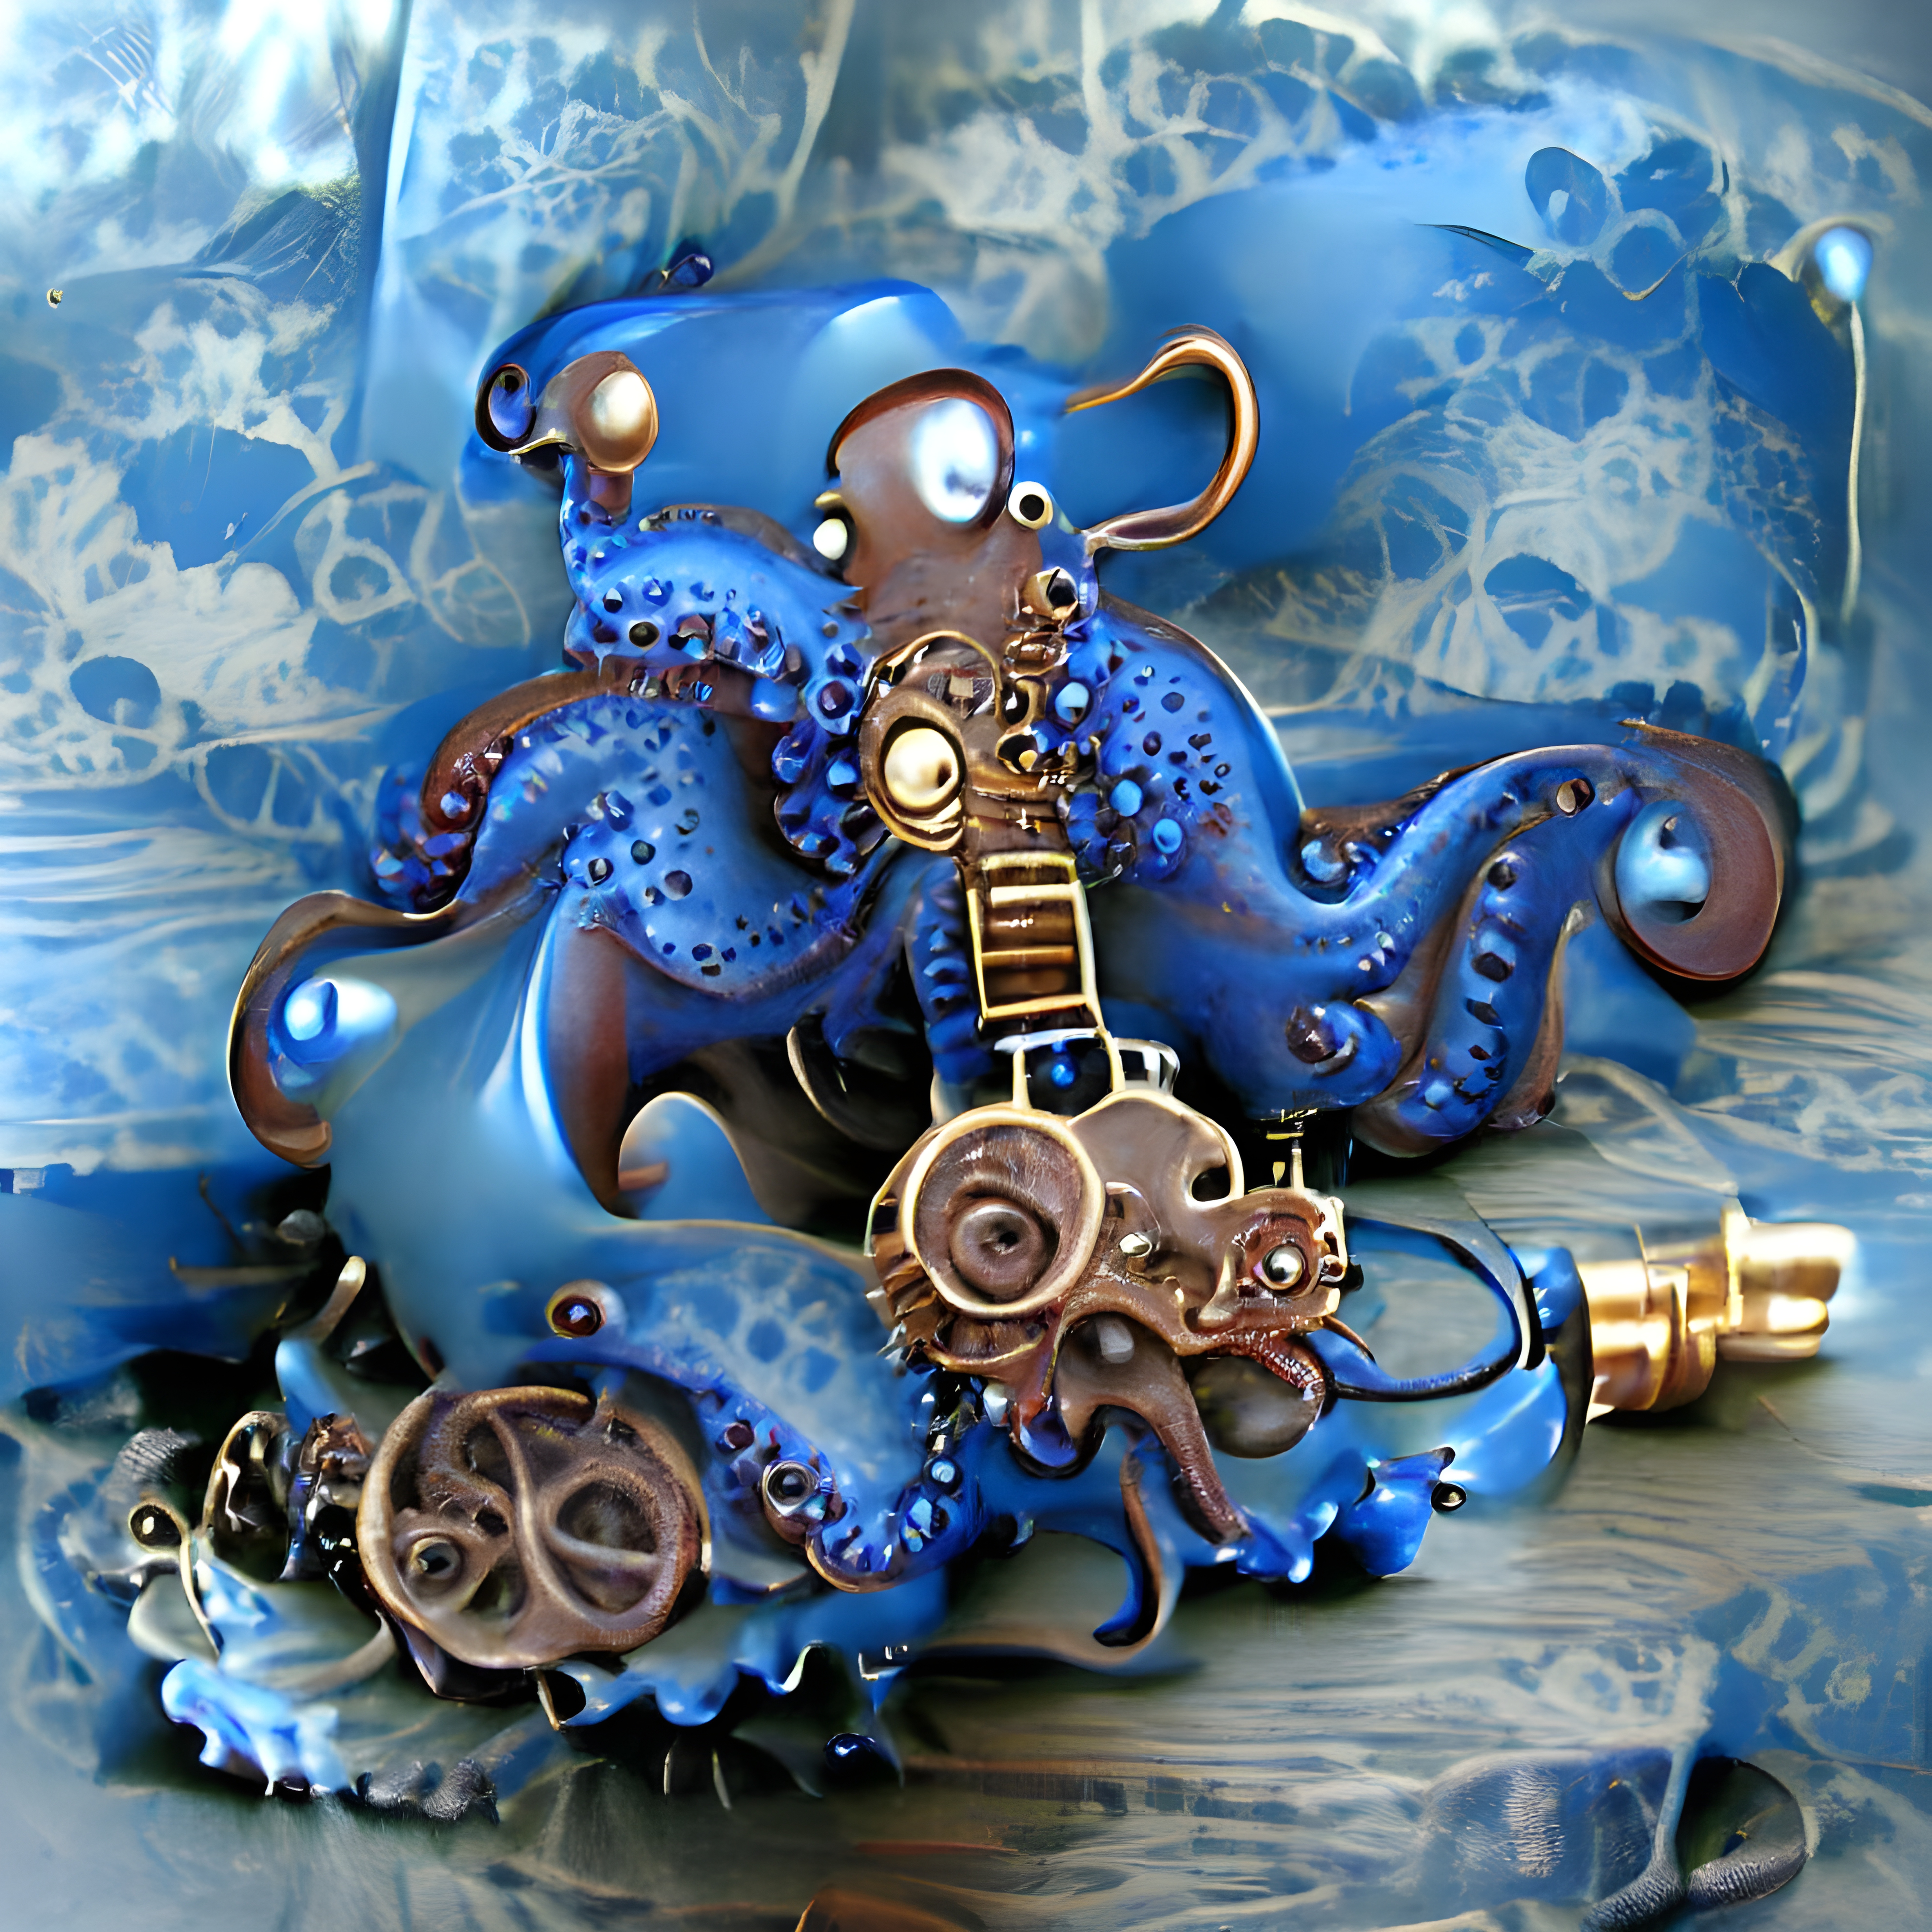 The Friendly Octopus